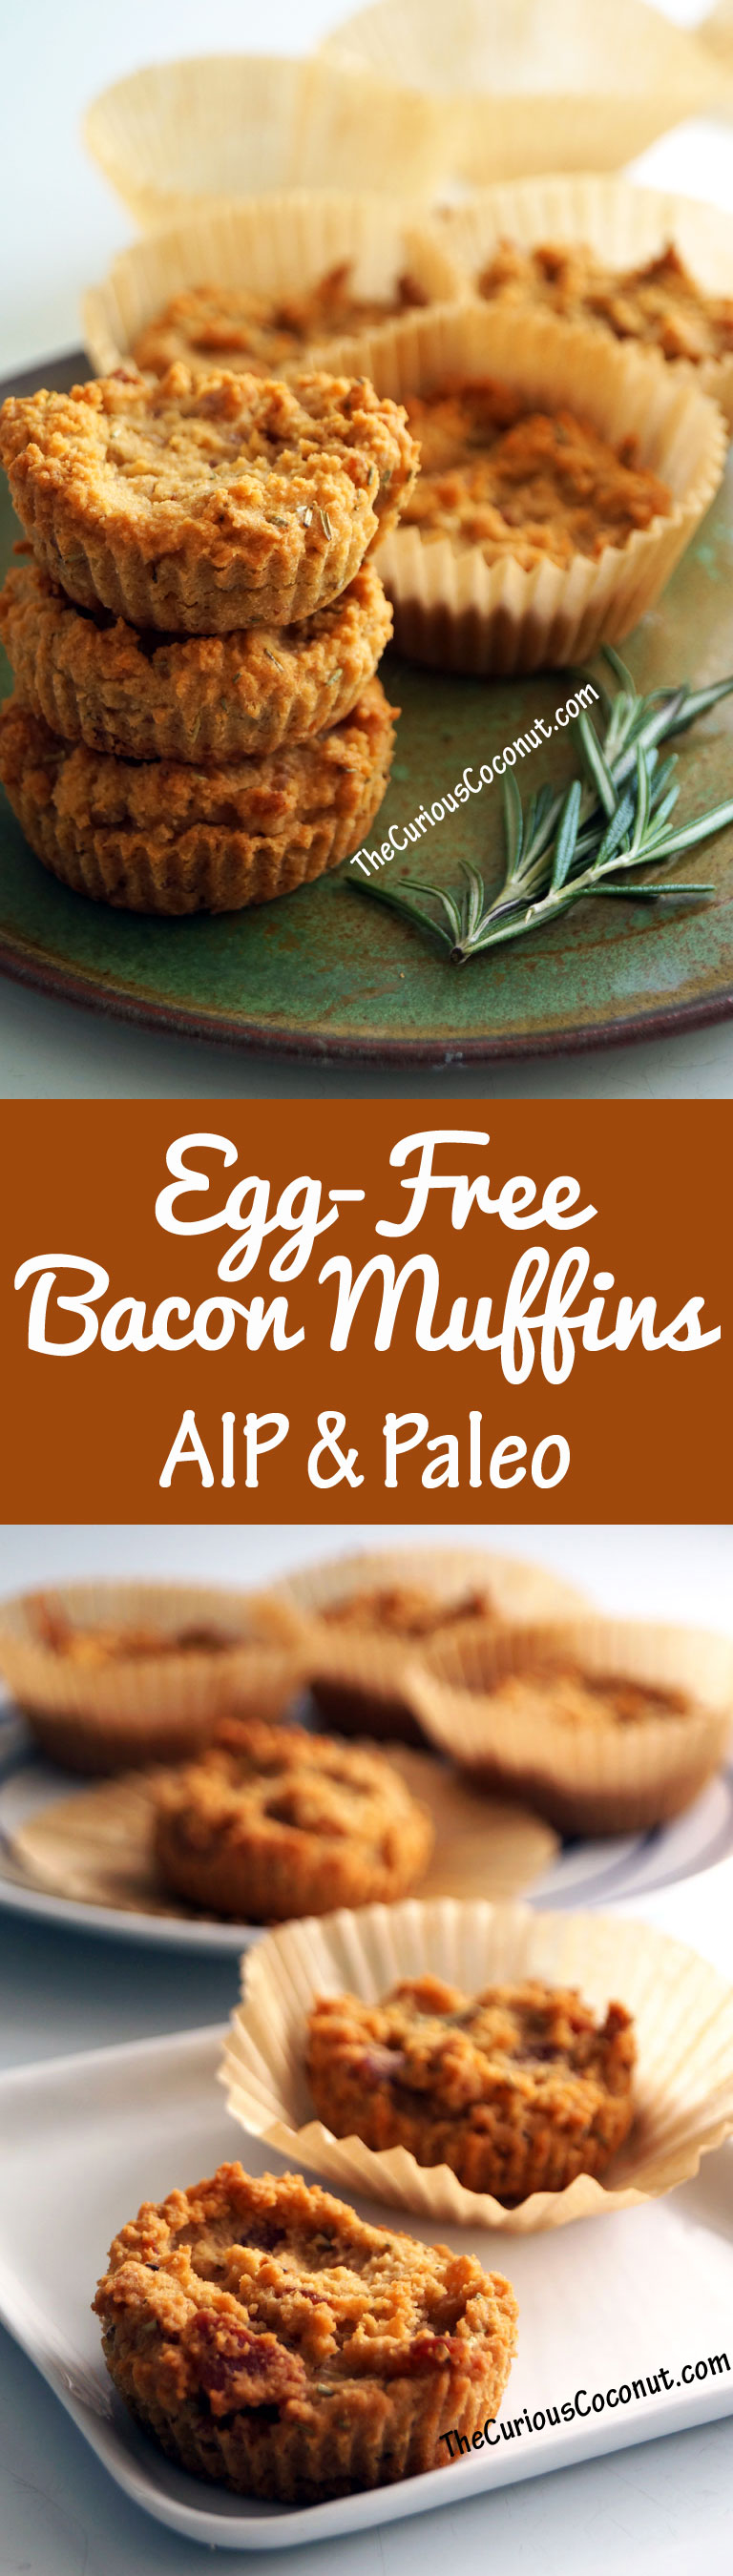 Egg-Free Bacon Herb Muffins. Protein-packed, delicious, perfect for the #AIP paleo protocol. // TheCuriousCoconut.com